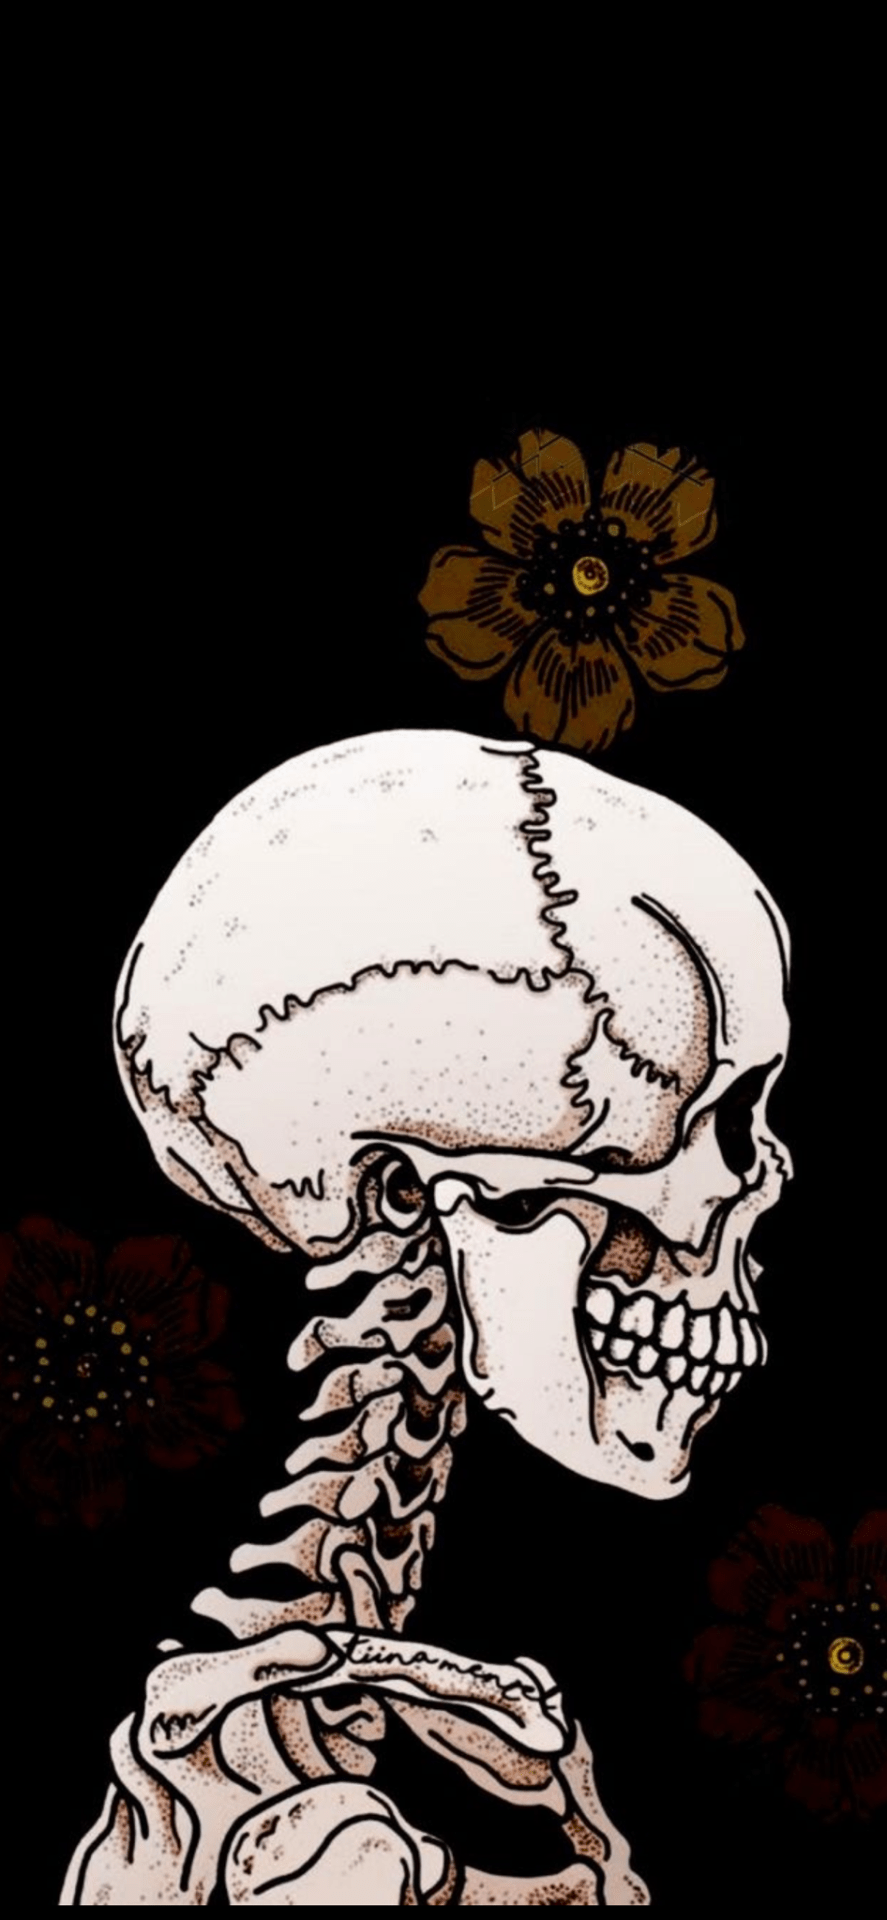 A skeleton with a flower on its head. - Skeleton